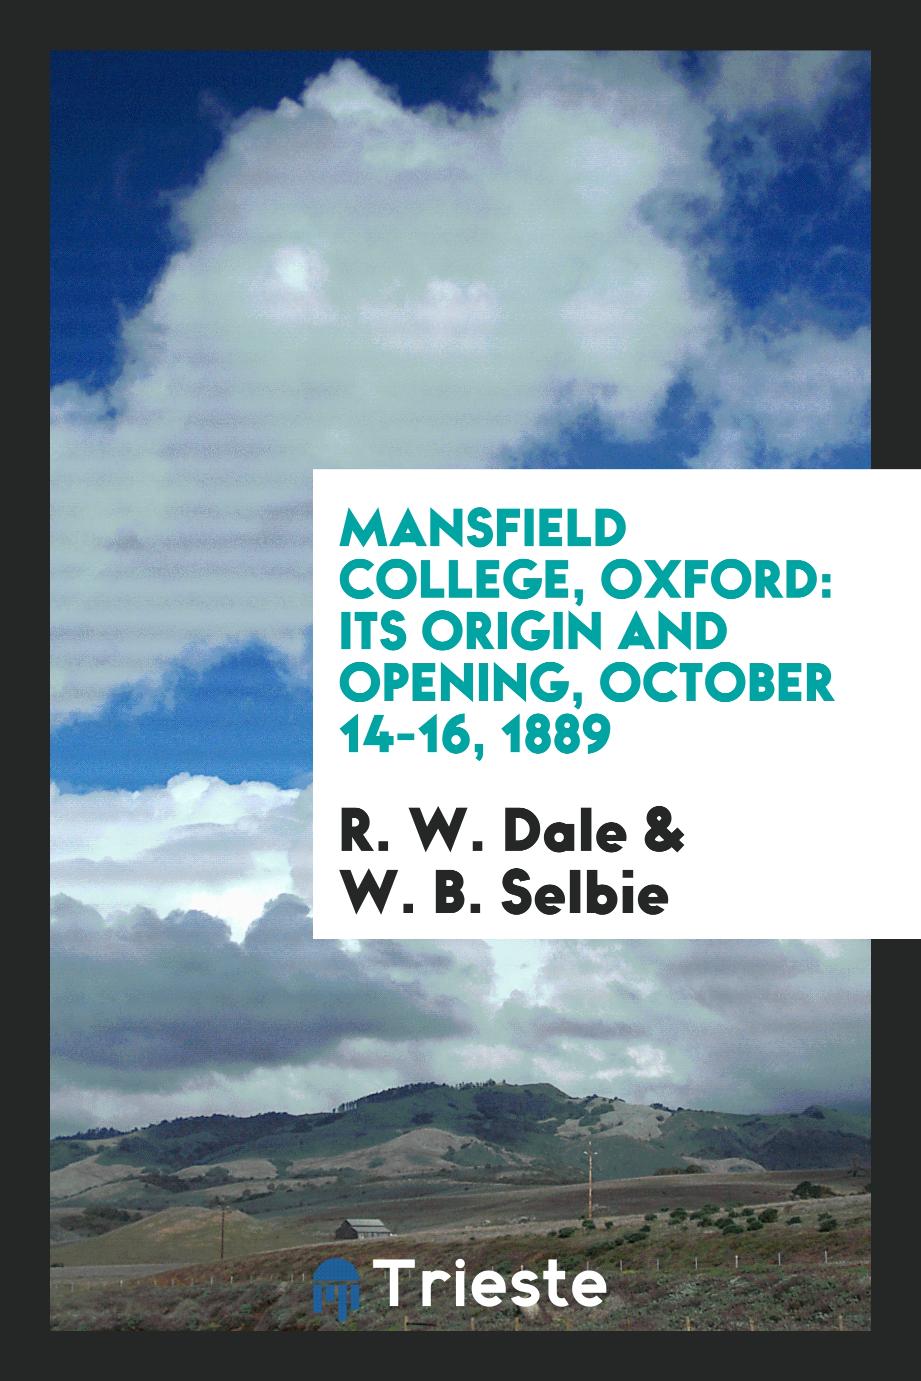 Mansfield College, Oxford: Its Origin and Opening, October 14-16, 1889